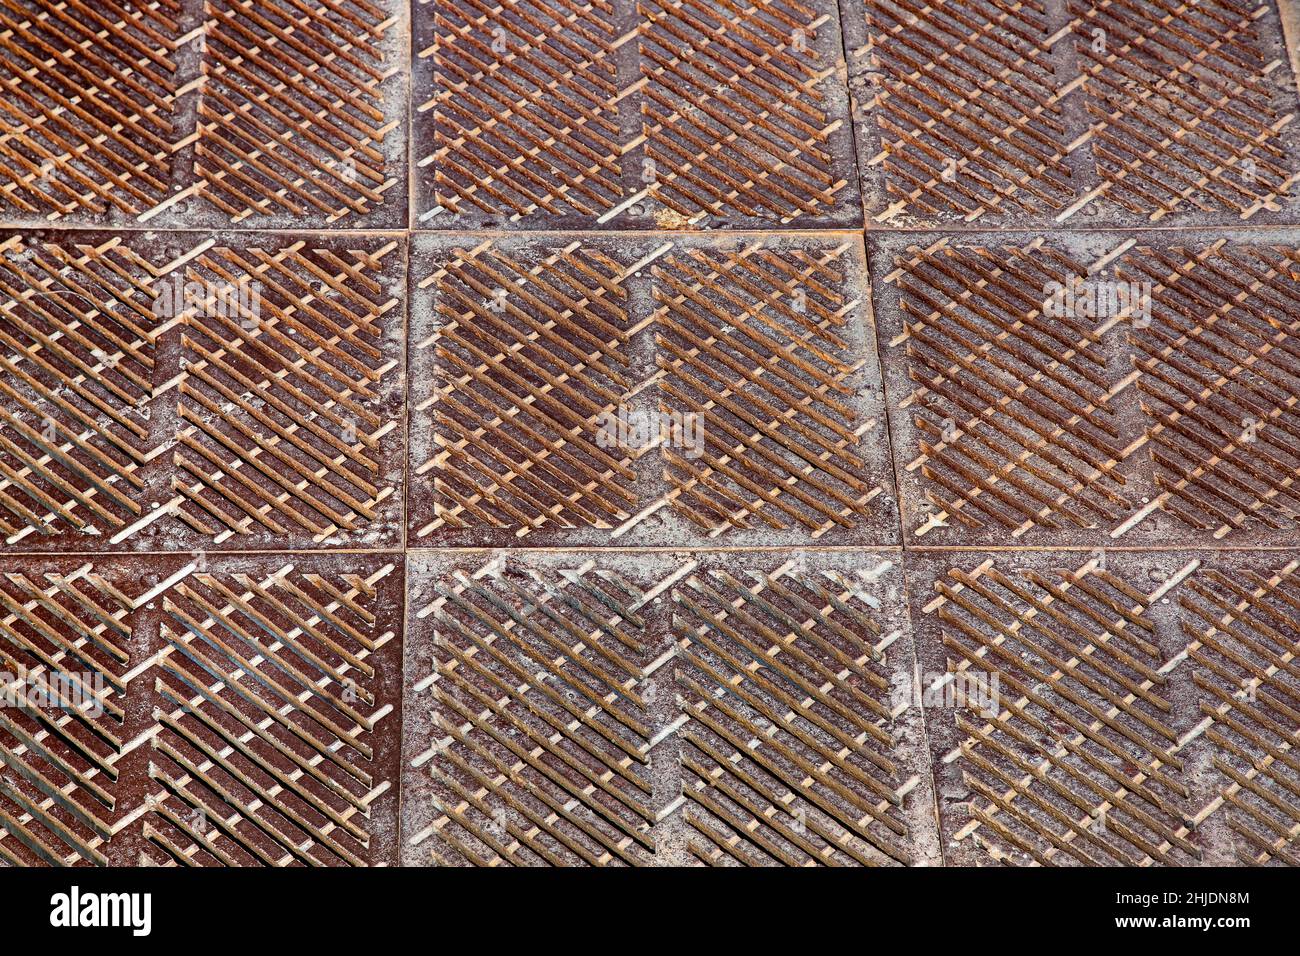 old rusty square shaped drainage grate, the surface of the storm system on the floor close-up. Stock Photo